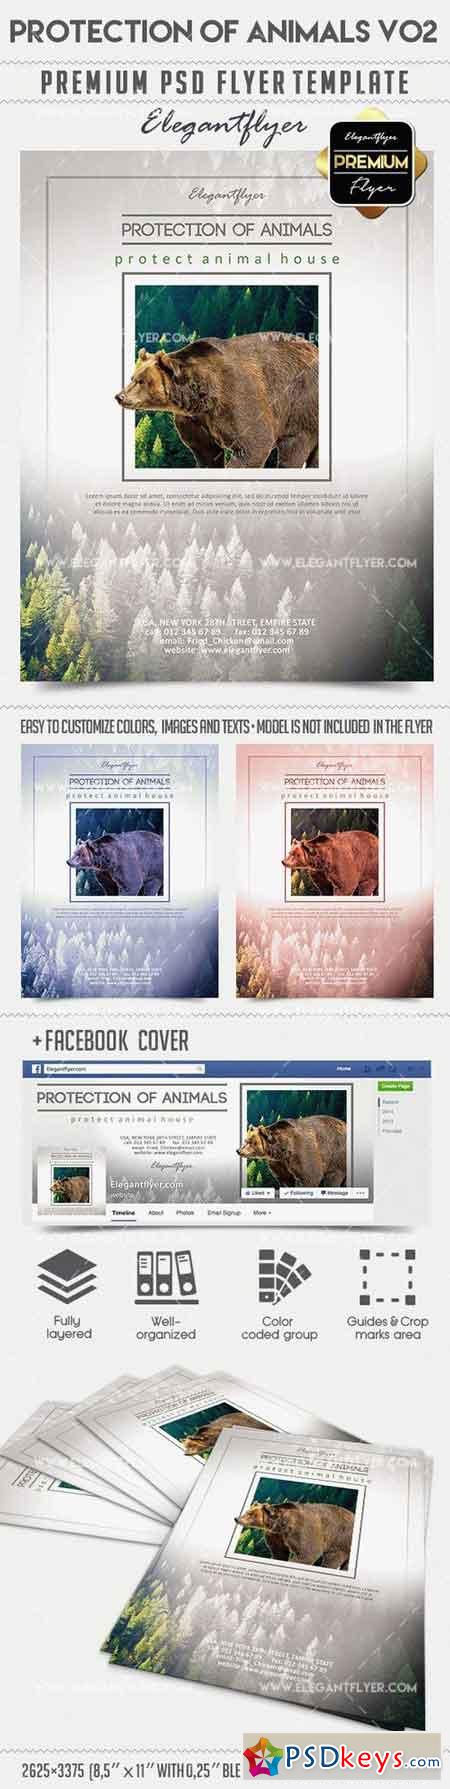 Protection Of Animals V02  Flyer PSD Template + Facebook Cover